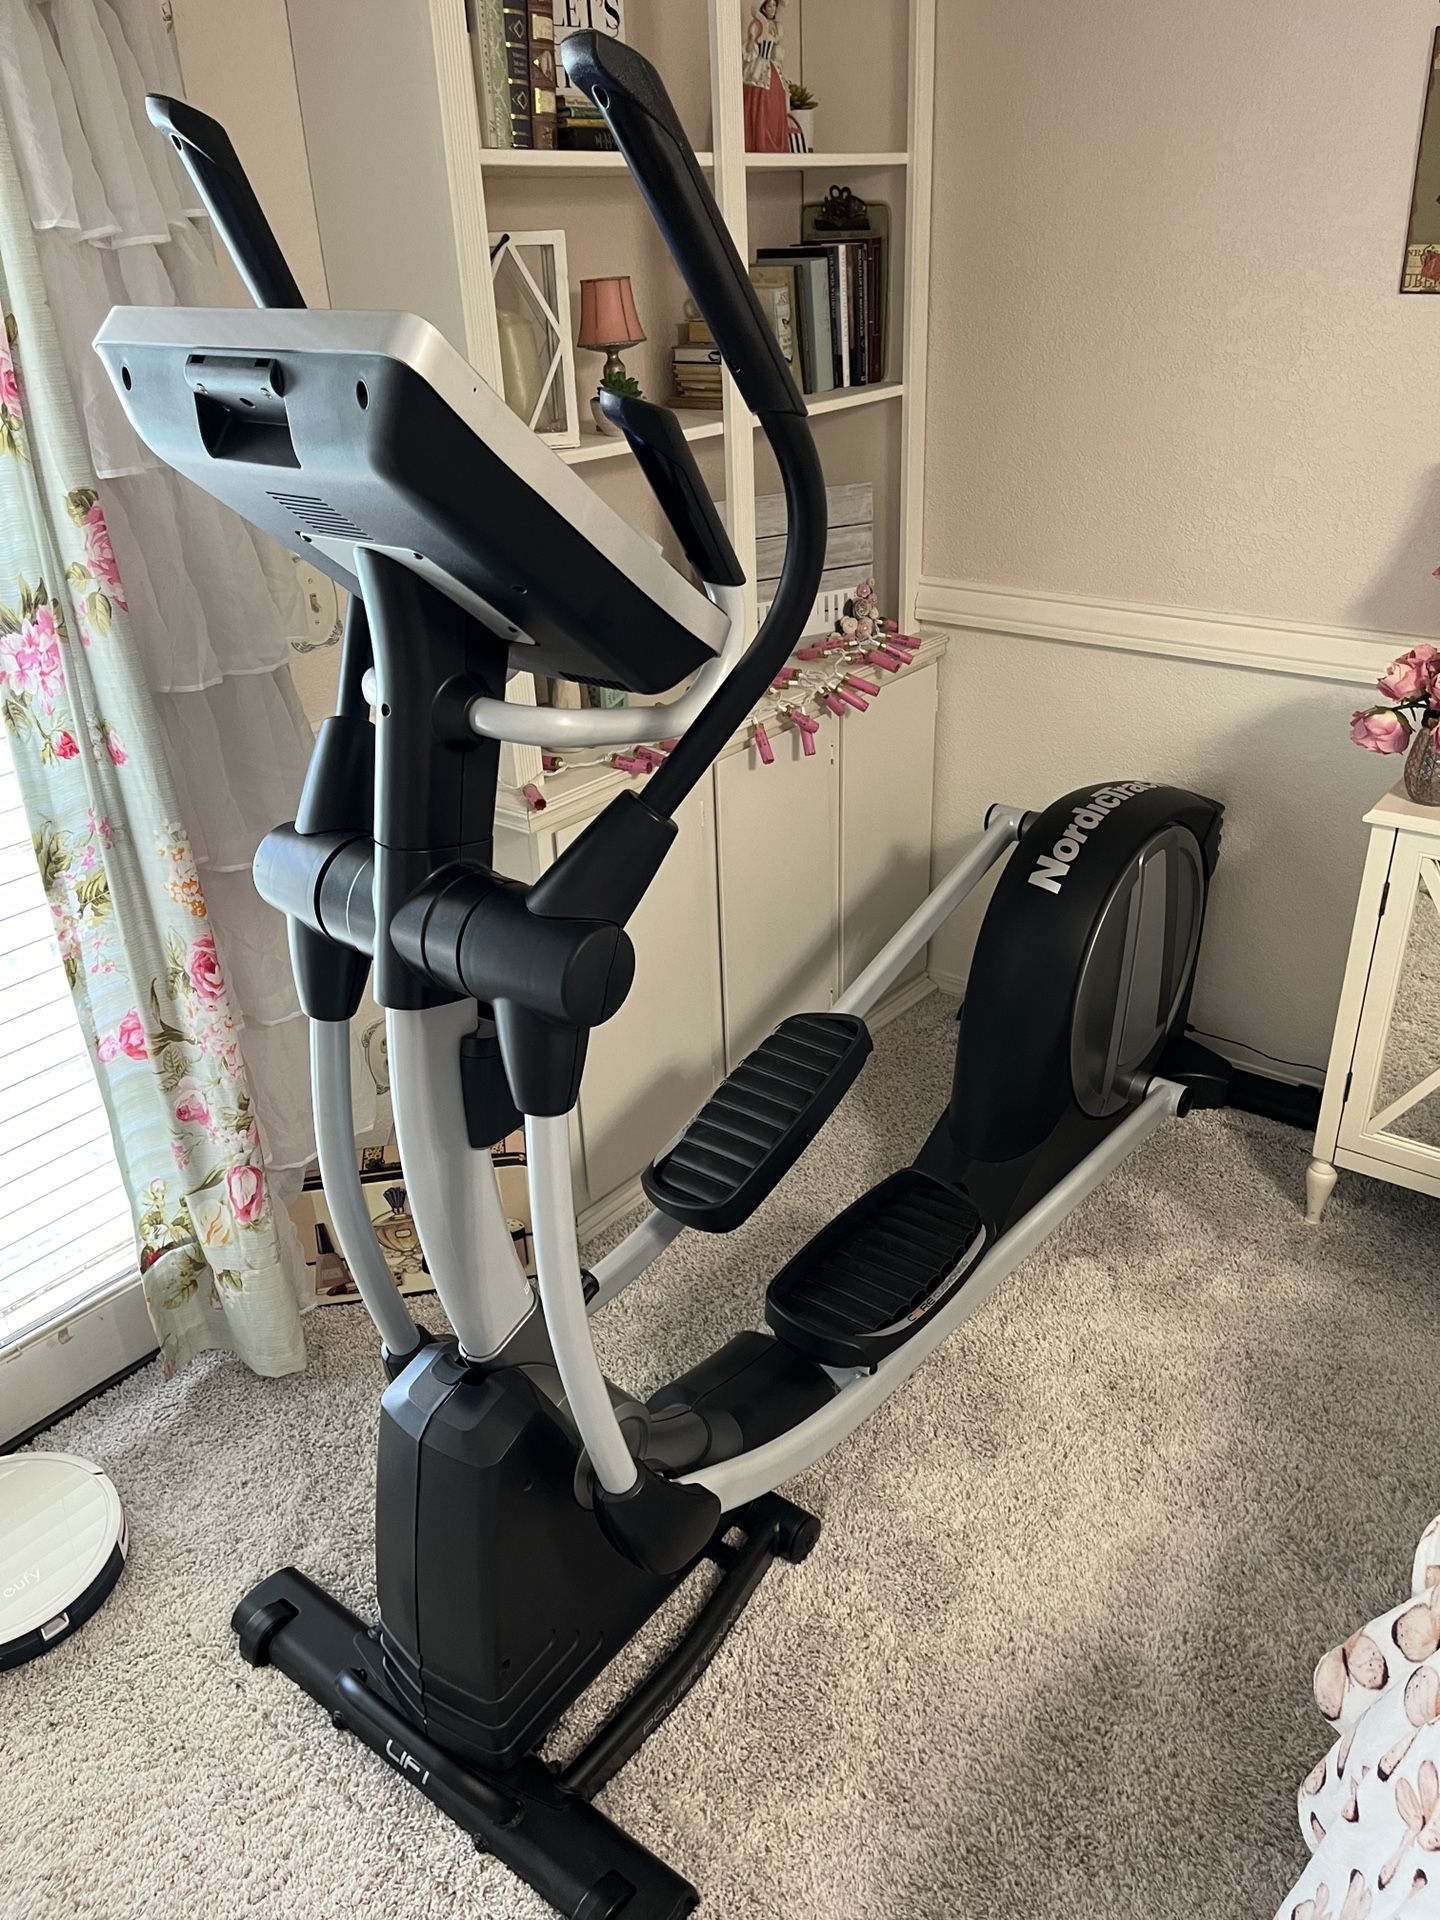 NordicTrack Spacesaver SE 9i Elliptical Exercise Machine (with iFit)